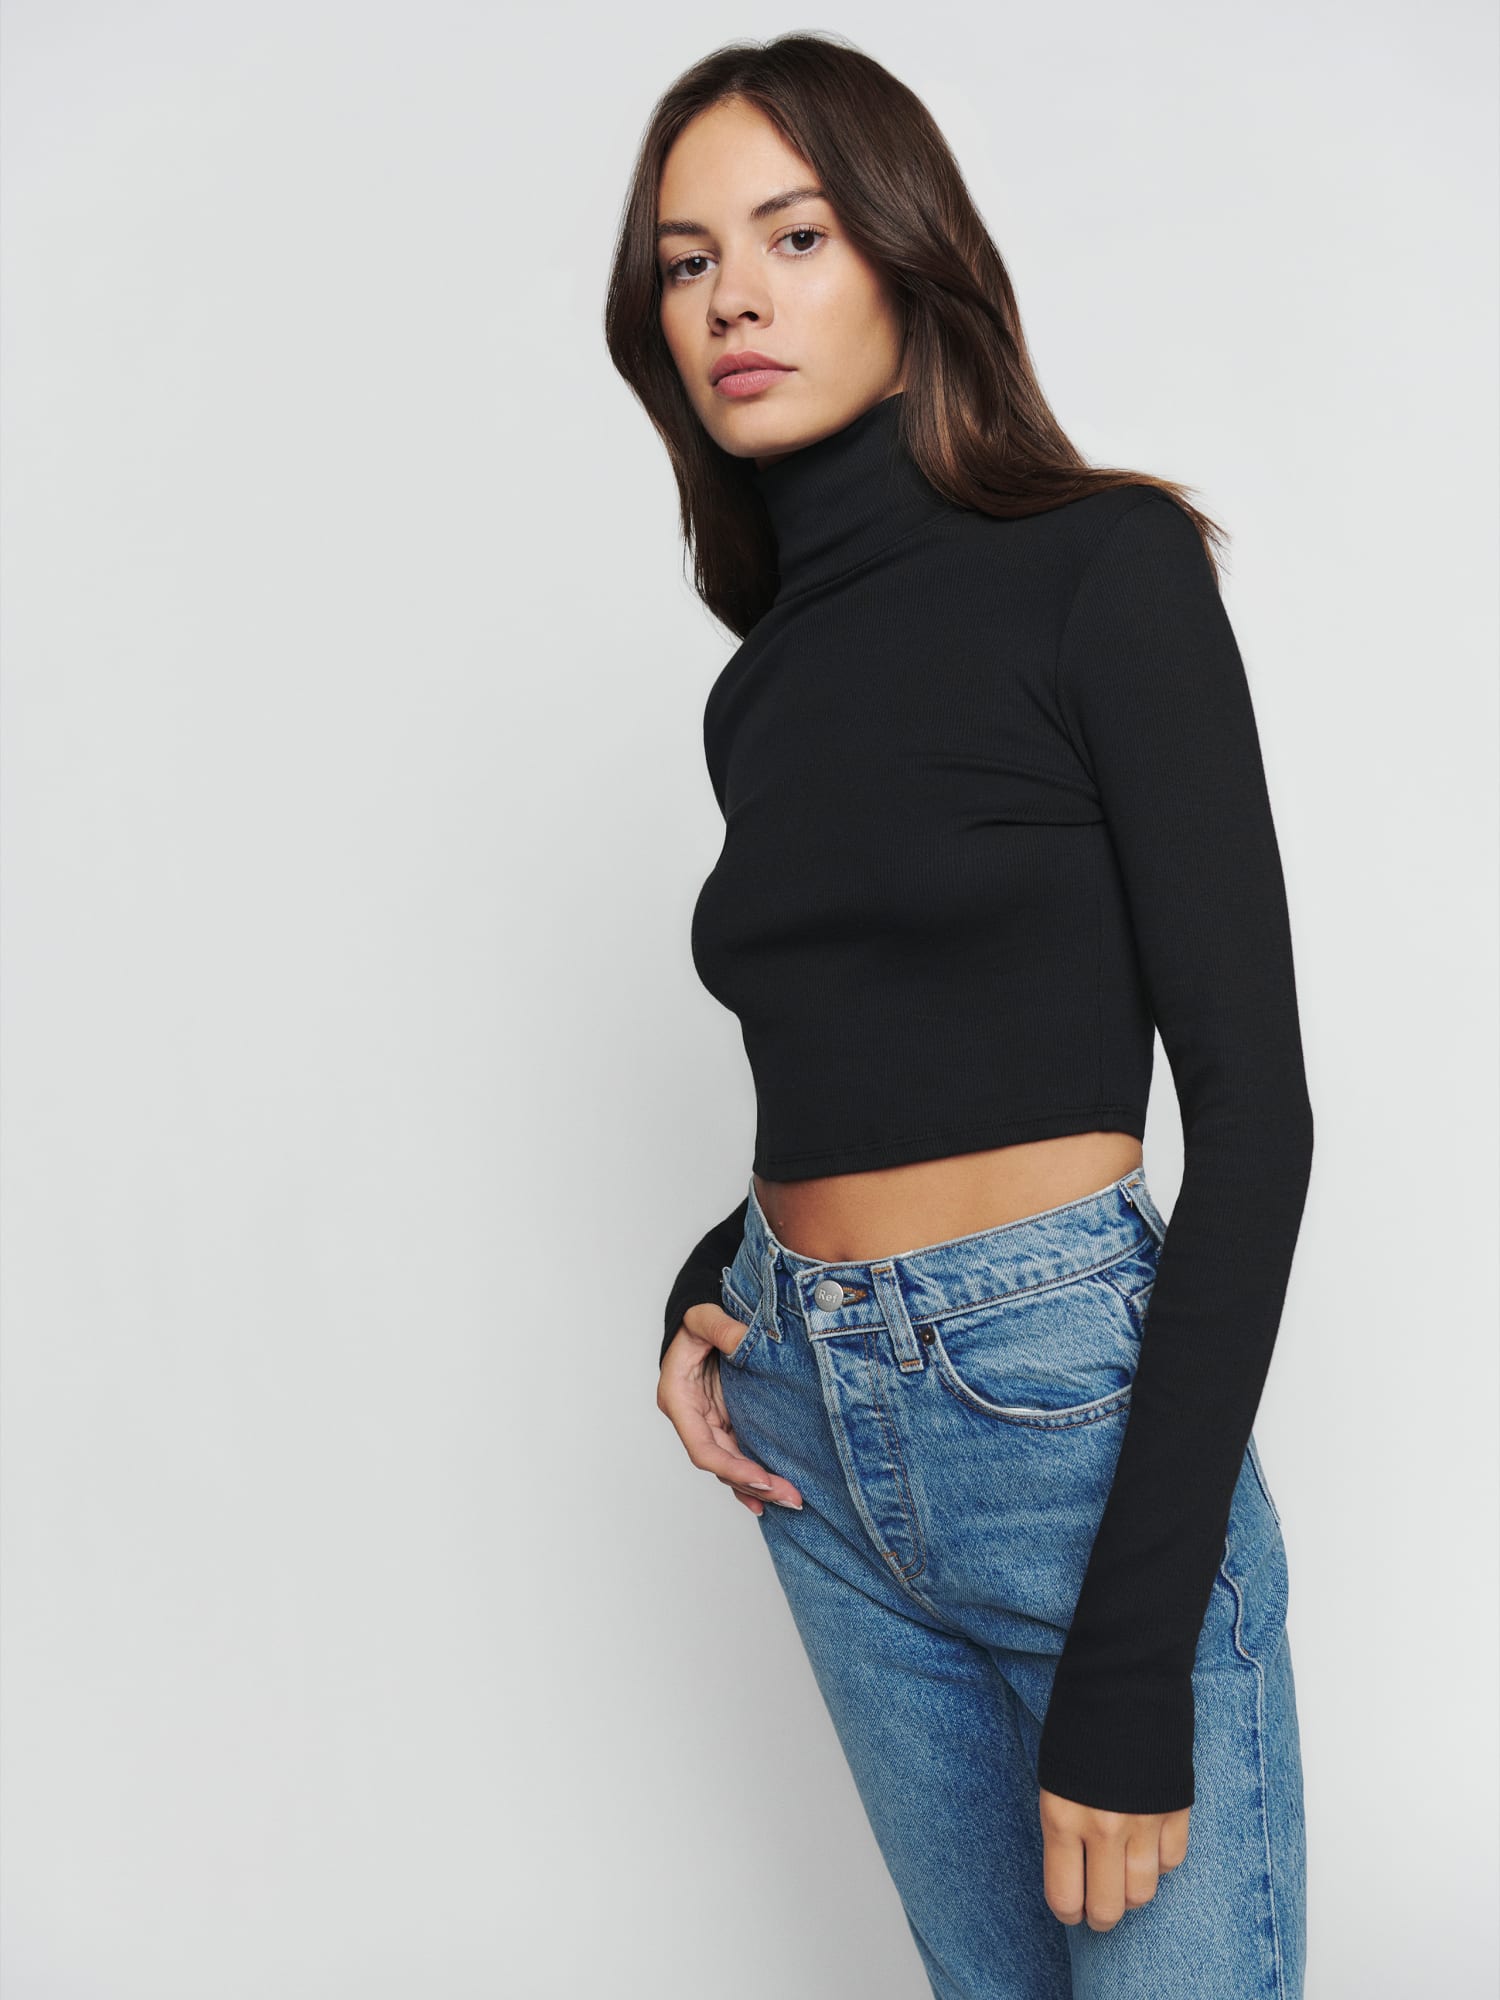 Forever Fave White Ribbed Turtleneck Top